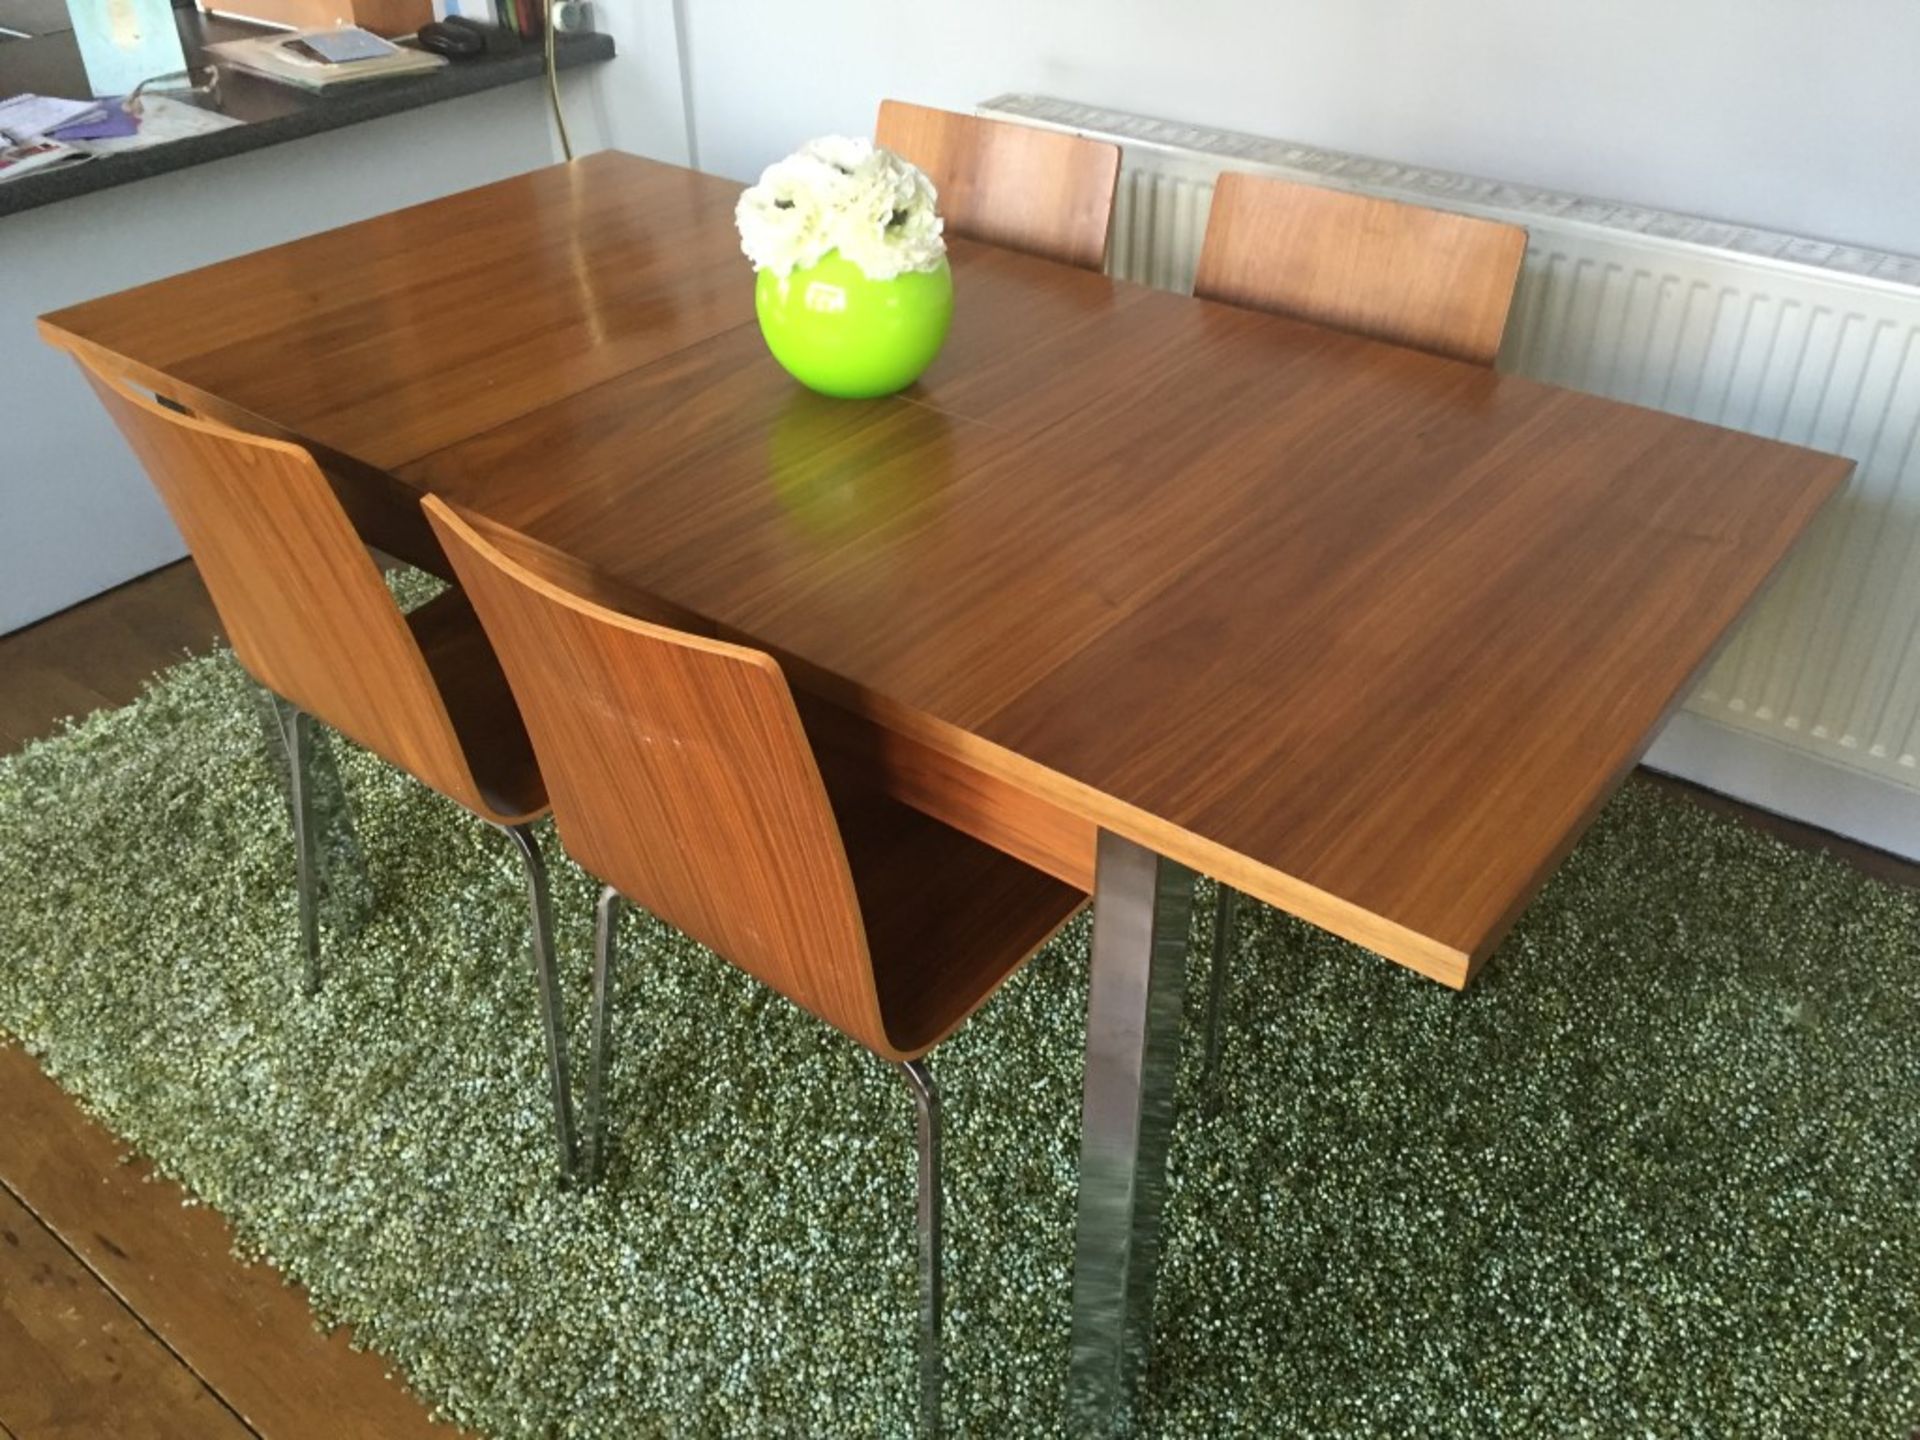 1 x Italian Extending Dining Table With 4 Chairs - Dimensions: Length 120cm (160cm Extended) x D80cm